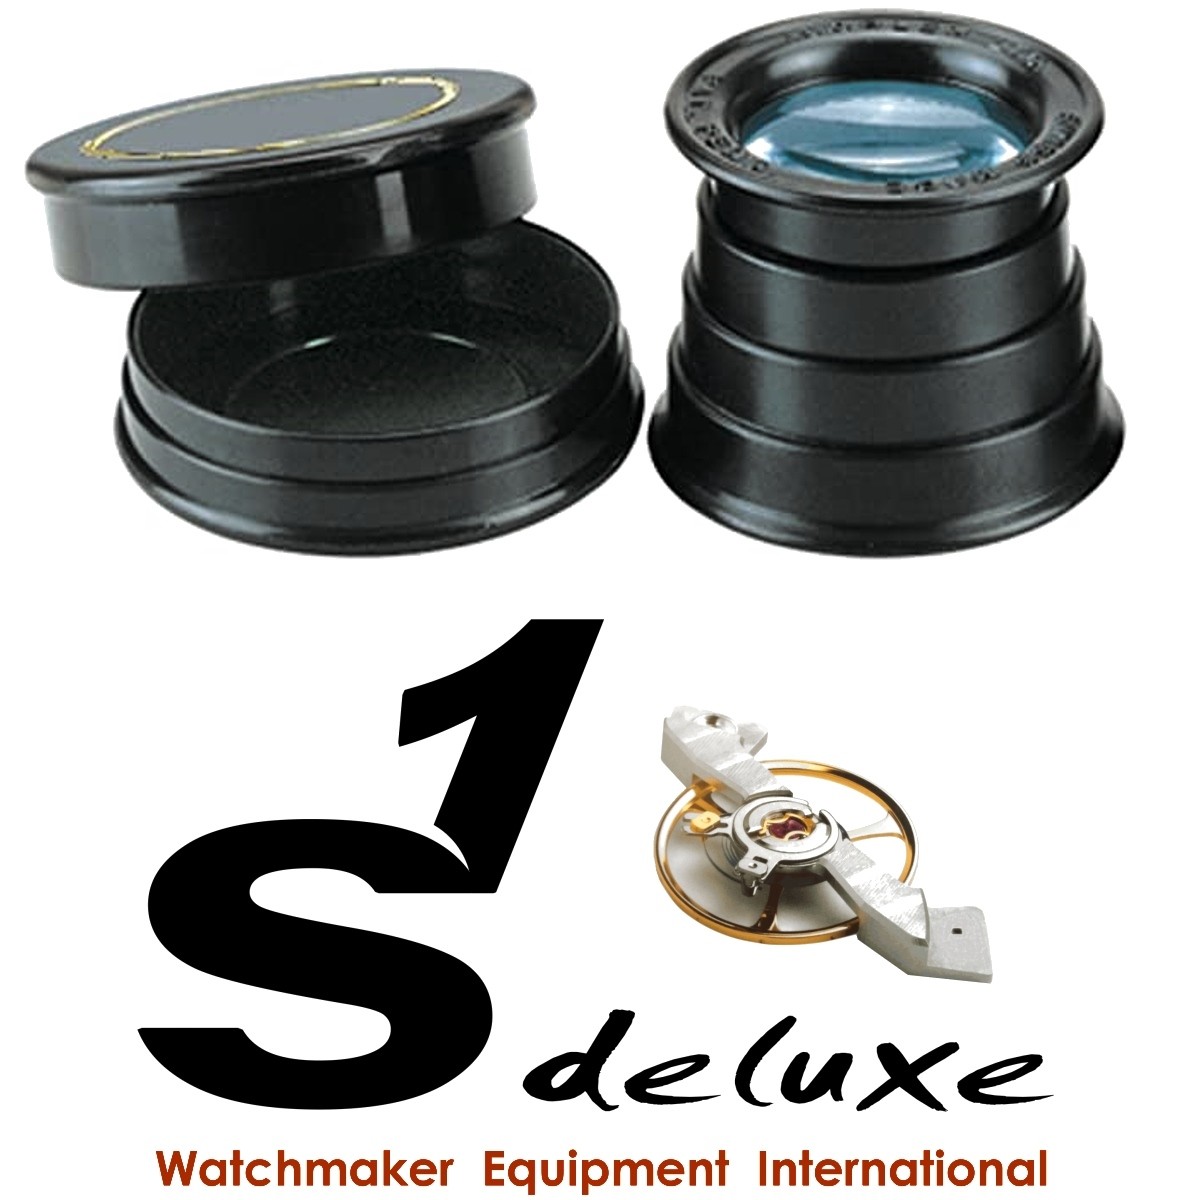 S1 DELUXE watchmaker eye-loupe set PREMIUM - What are some decent  watchmaker loupe?